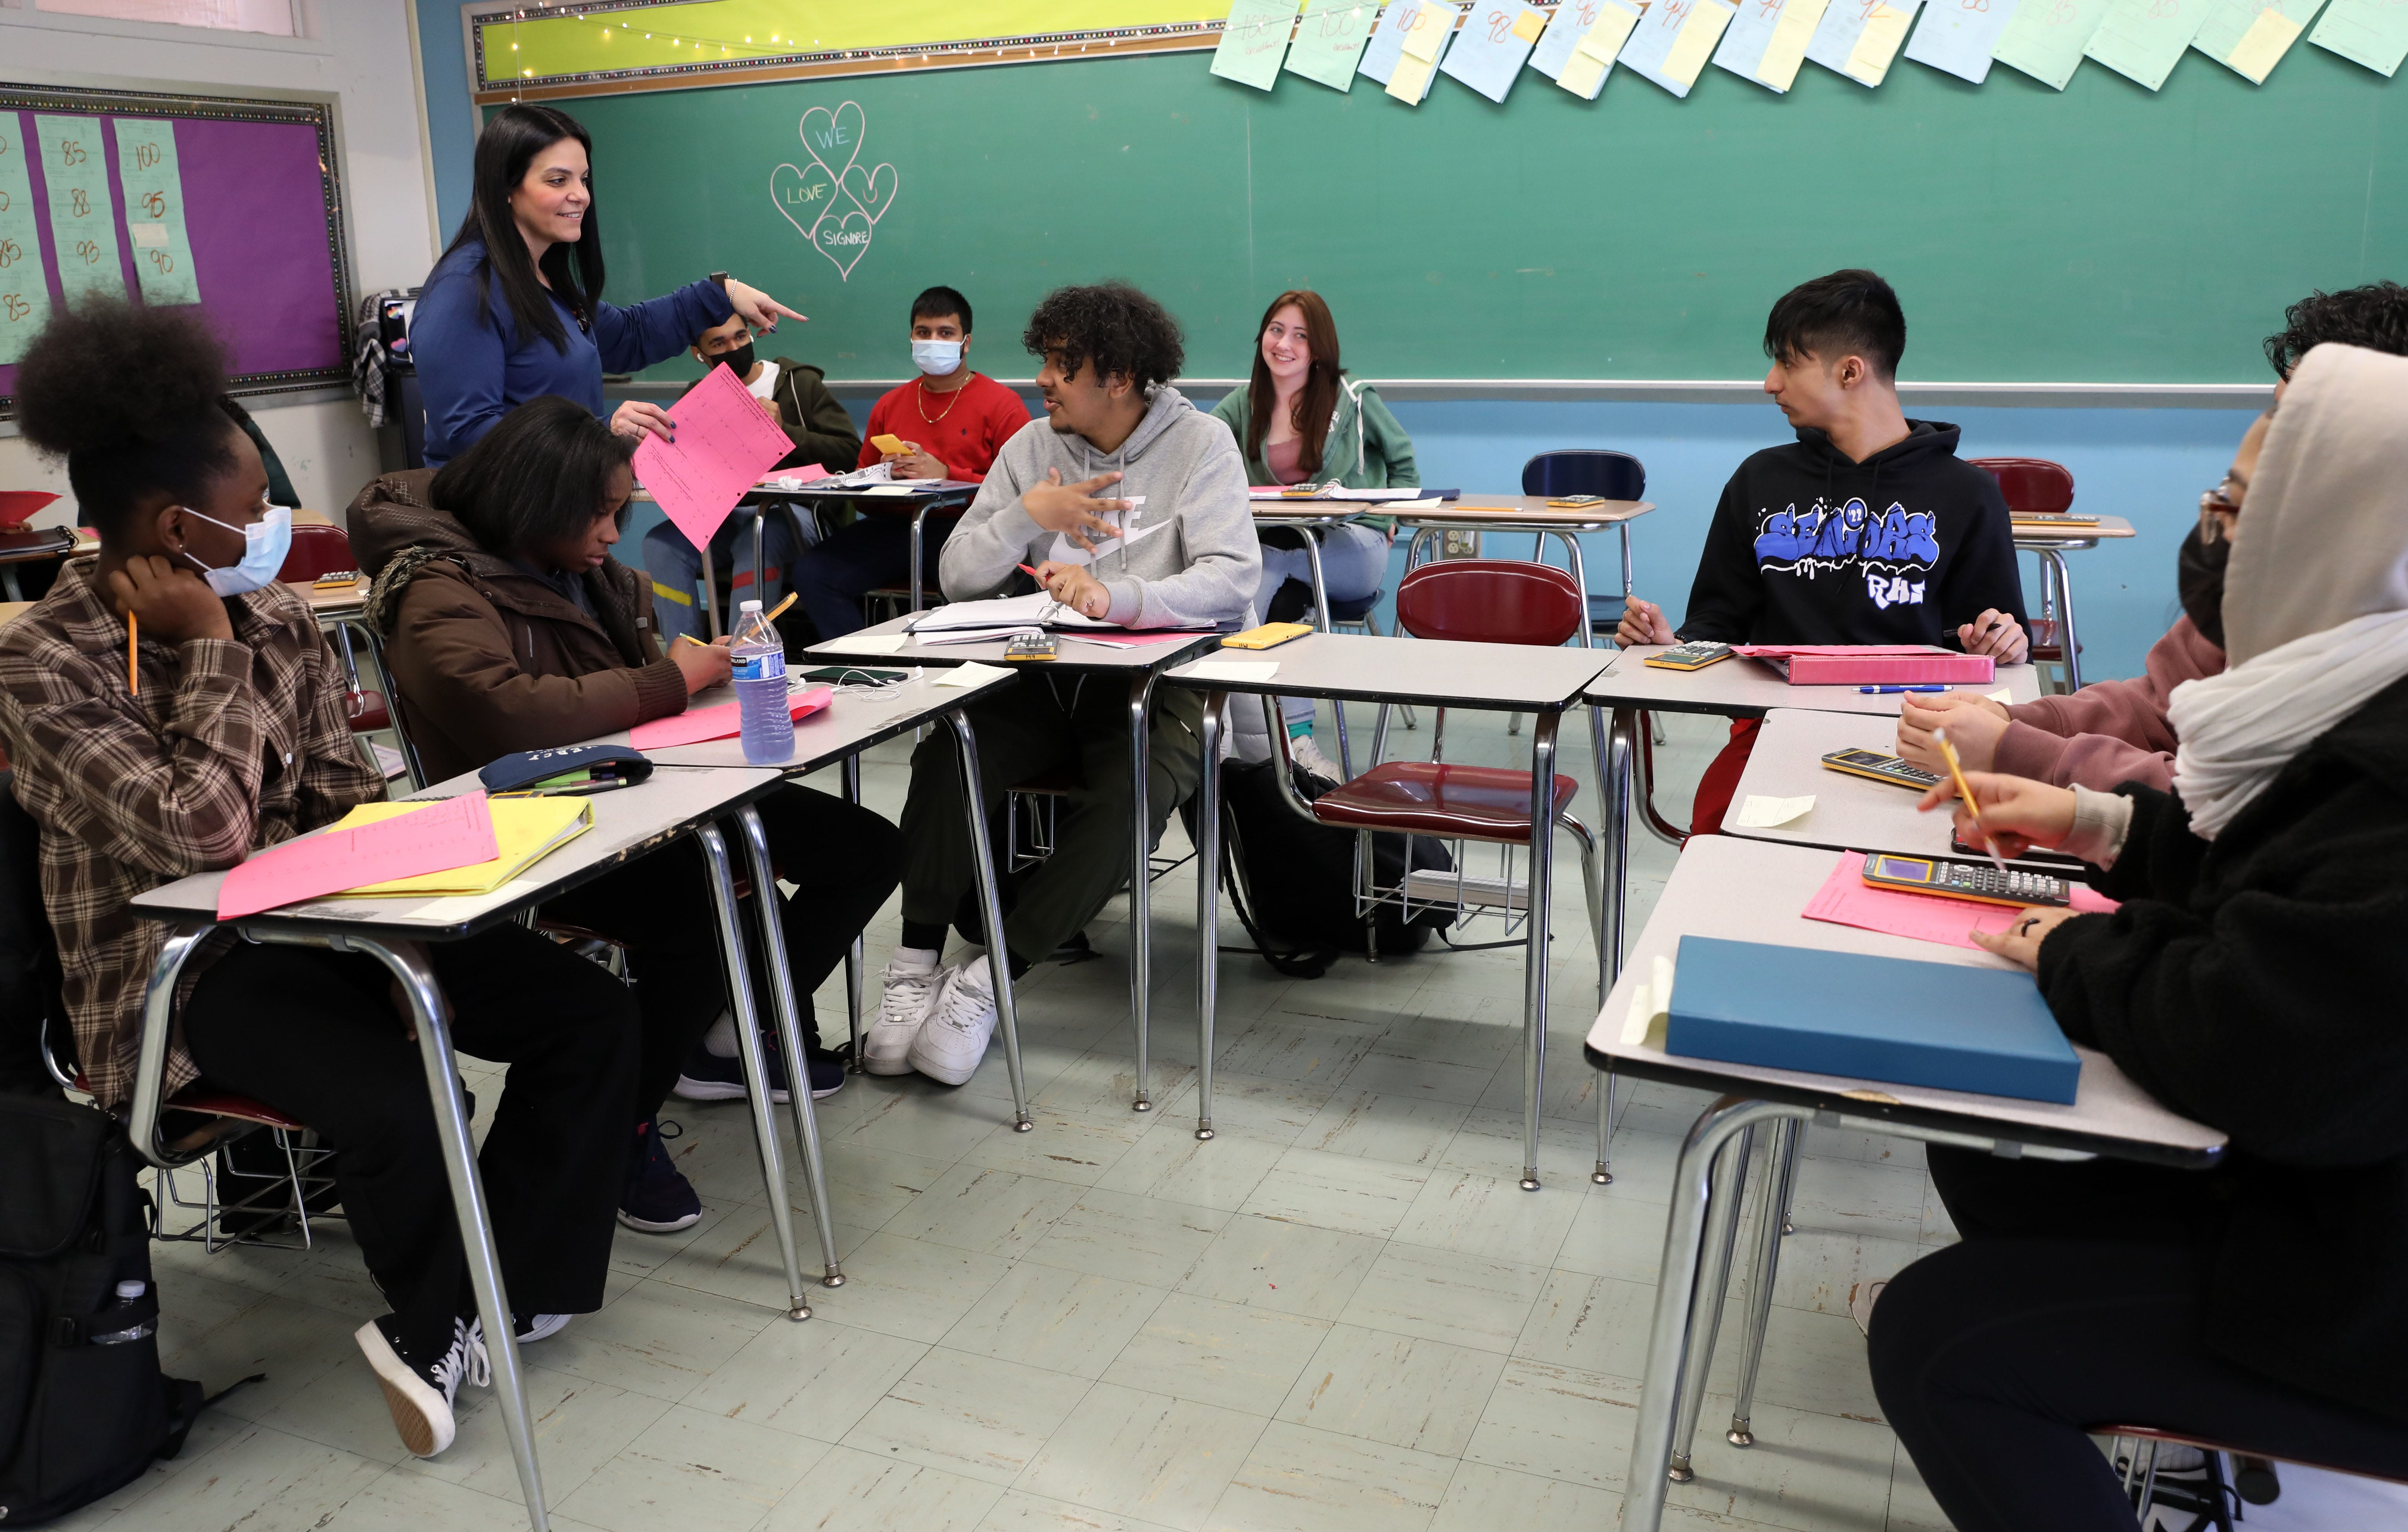 Marisa Signore leads a precalculus class at Roosevelt High School Early College Studies in Yonkers on March 2, 2022. Today marked the lifting of the state's mask mandate for schools after two years of pandemic education.